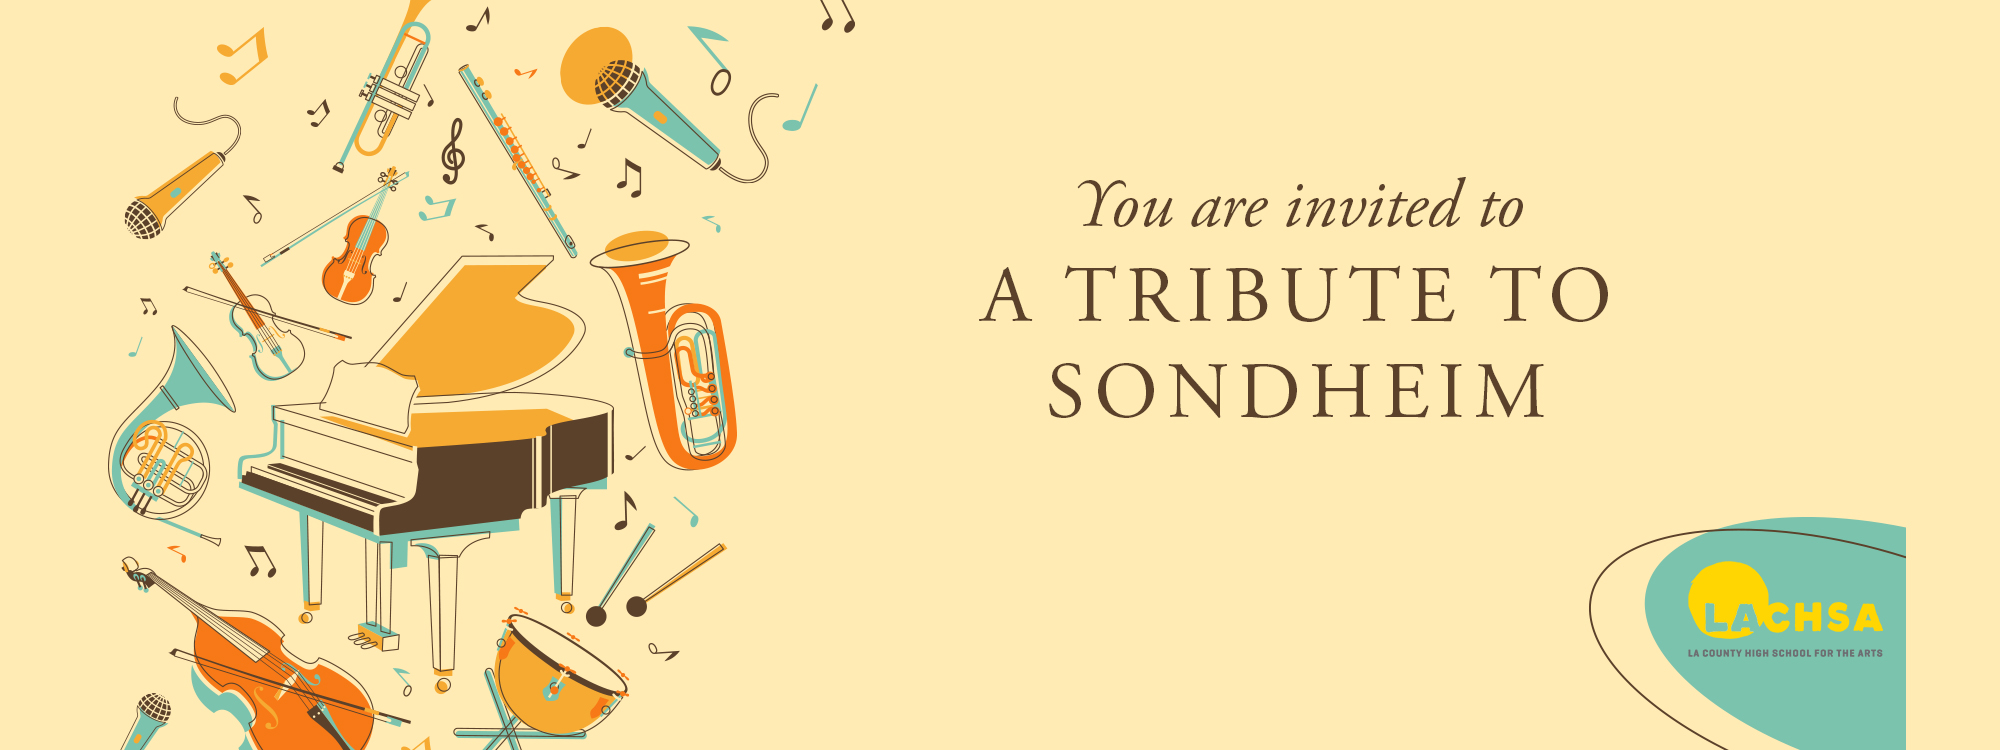 A Tribute to Sondheim presented by LACHSA